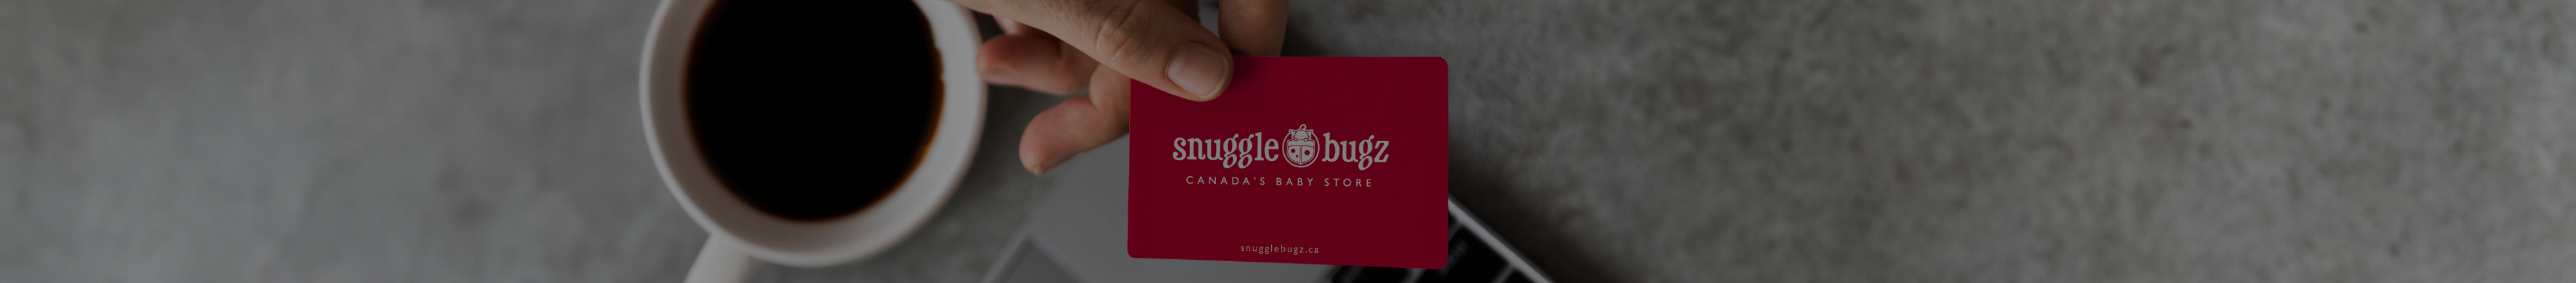 Women on her computer holding a Snuggle Bugz gift card